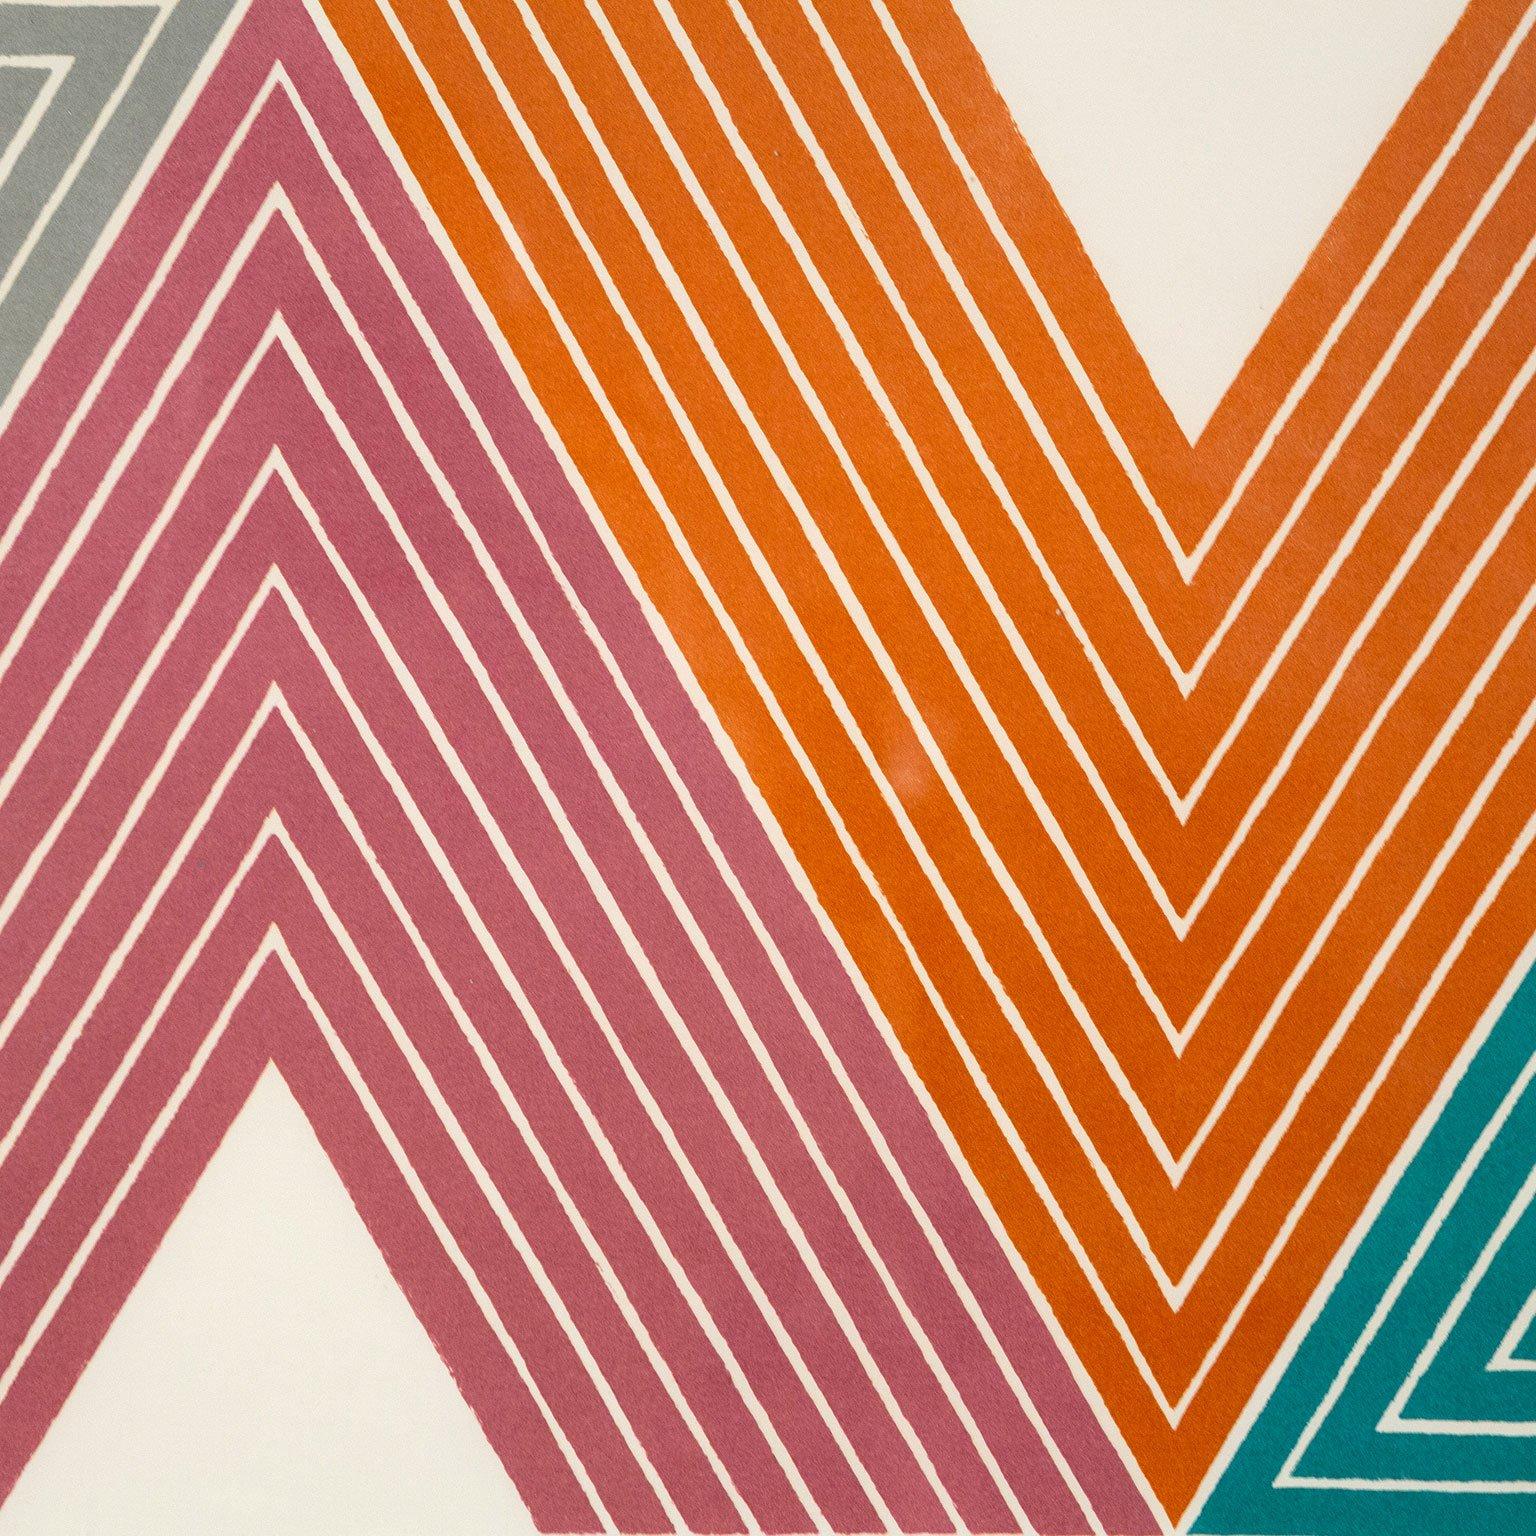 Empress of India II - Abstract Expressionist Print by Frank Stella